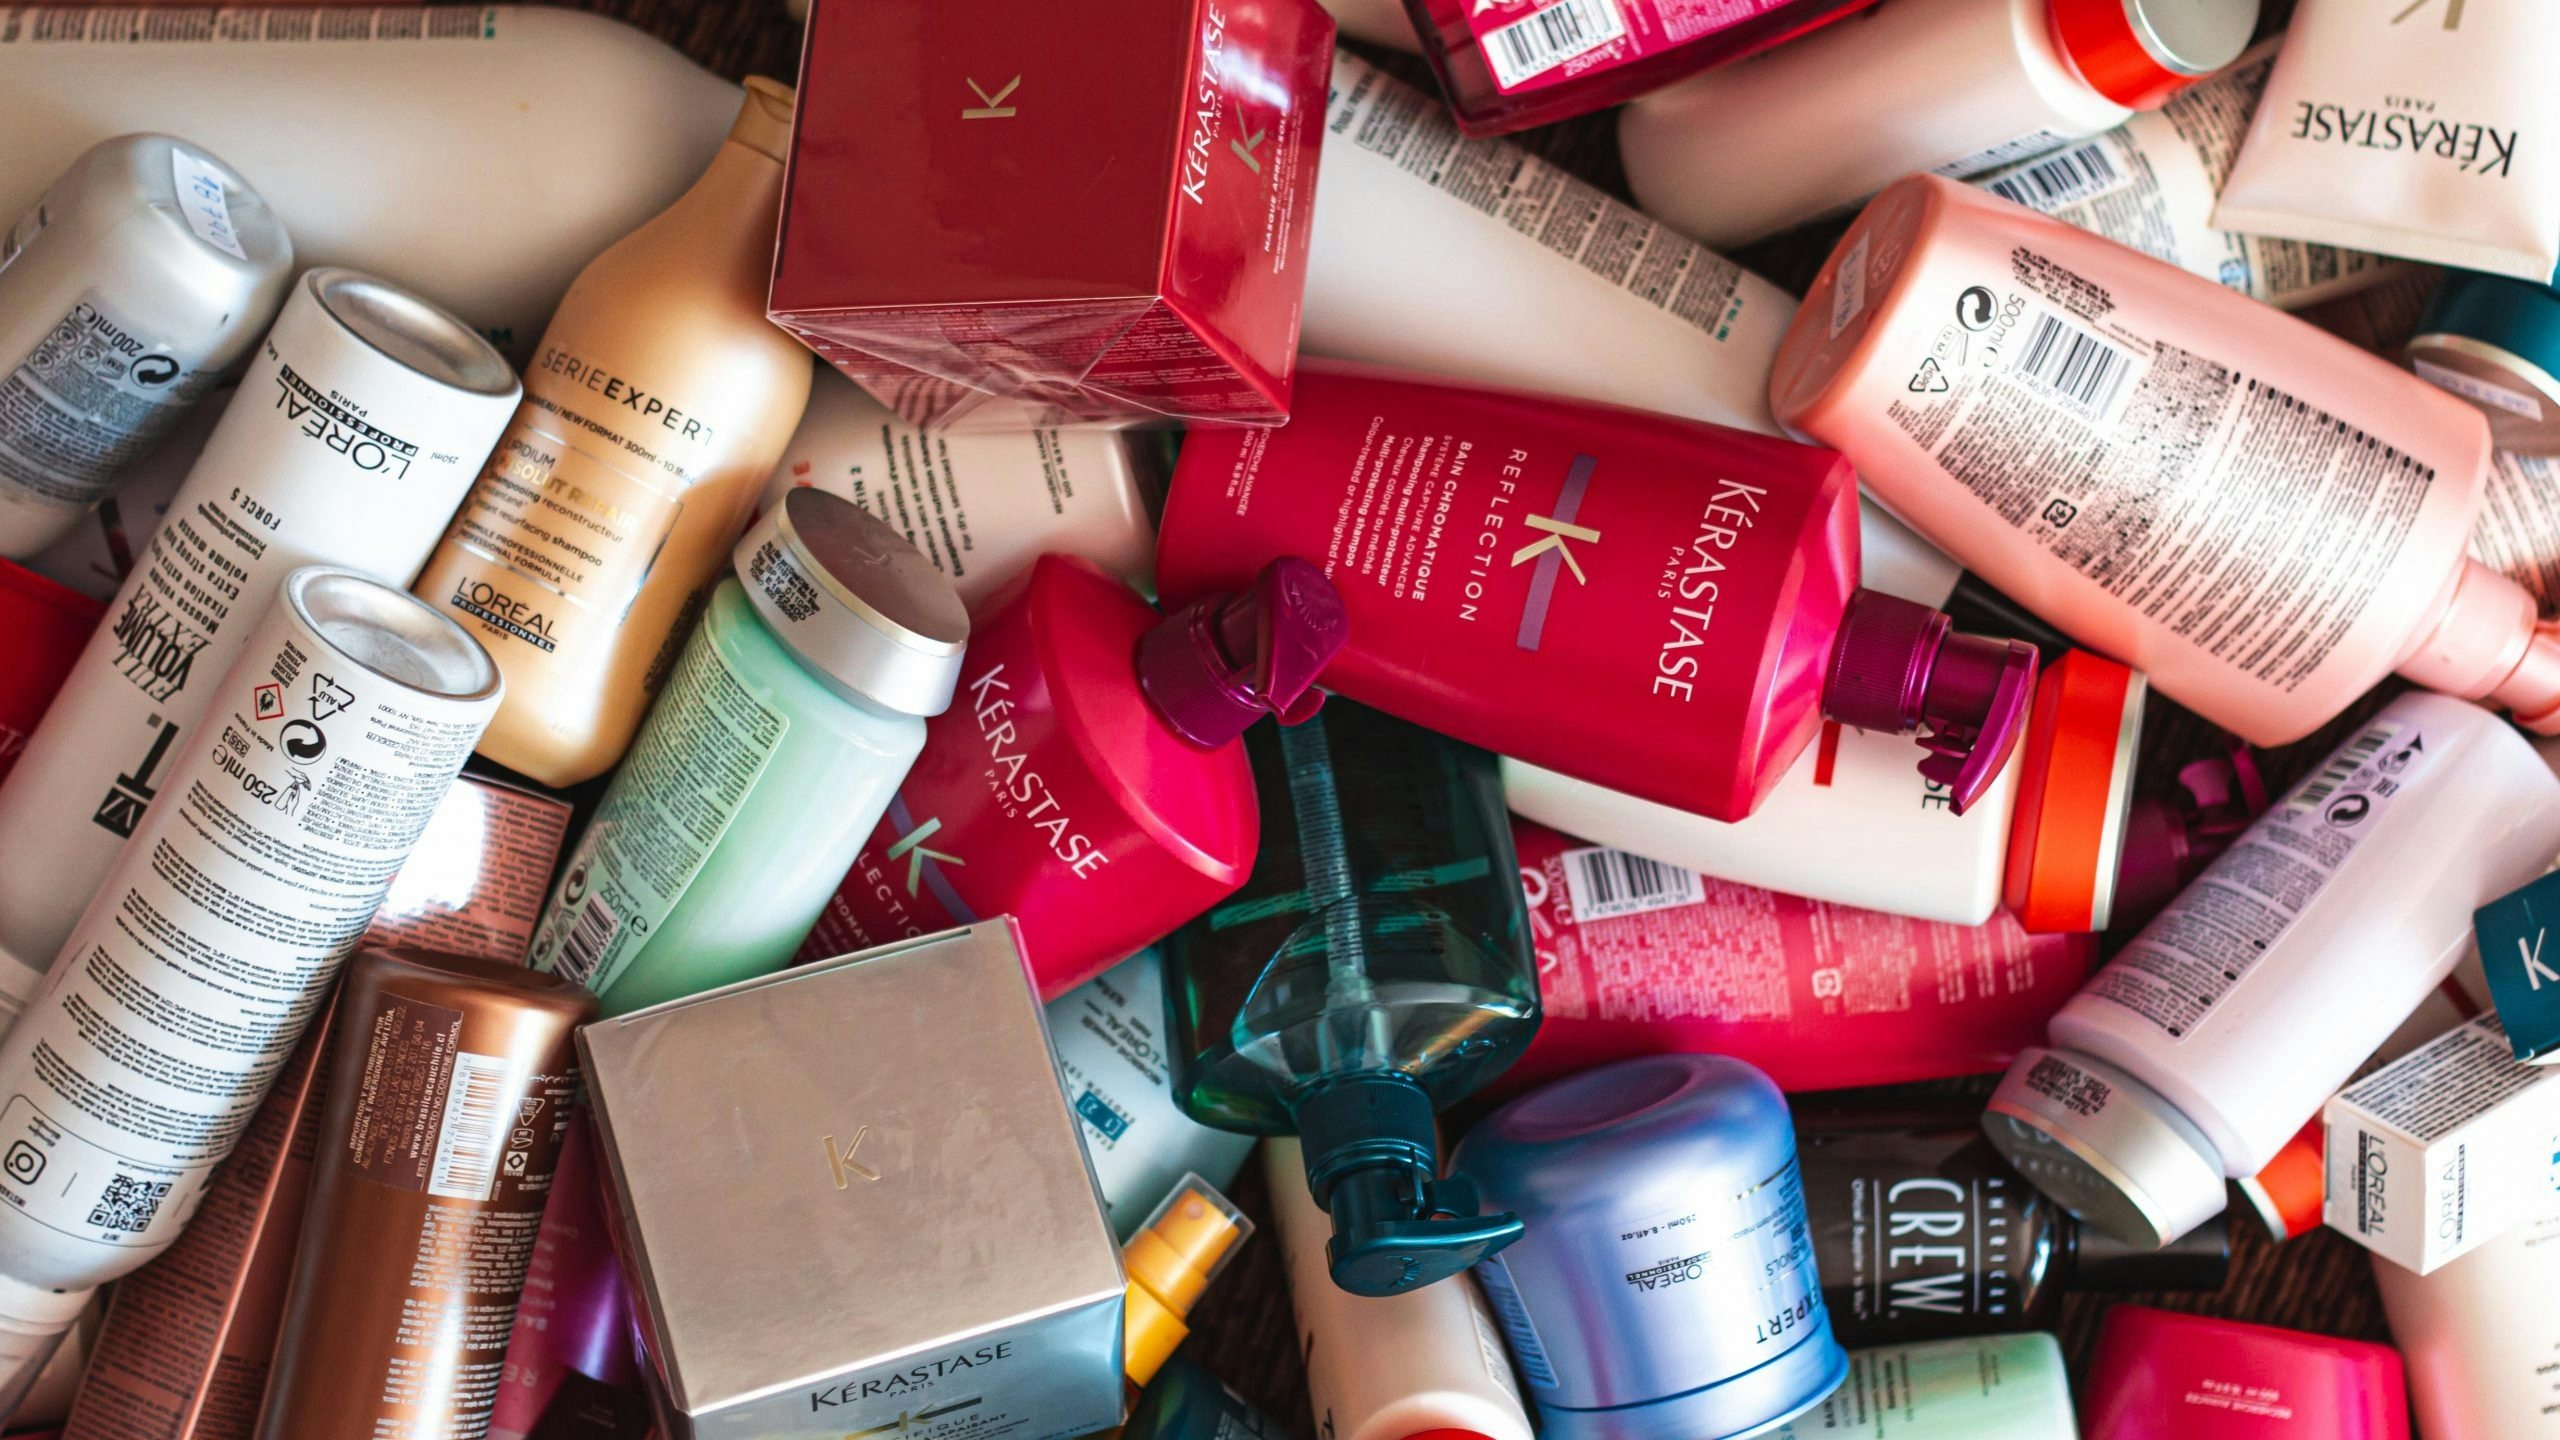 Behind the glamor, there’s an ugly side to the beauty industry. Here’s how L’Oréal and Alibaba hope to tackle the sustainability problem. Photo: Shutterstock 